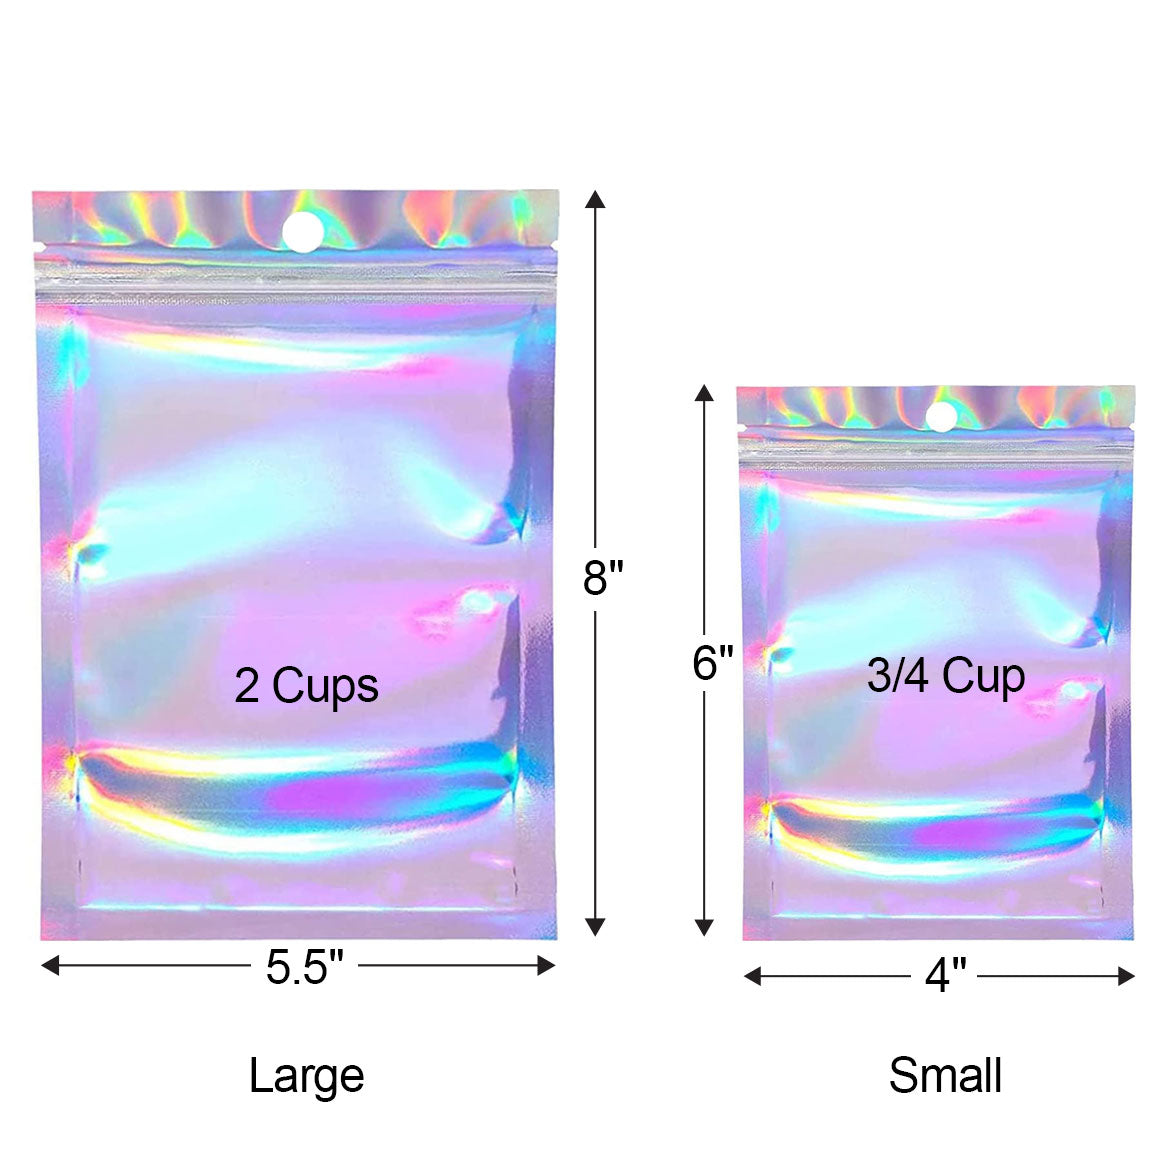 Freeze Dried Candy Bag Dimensions.